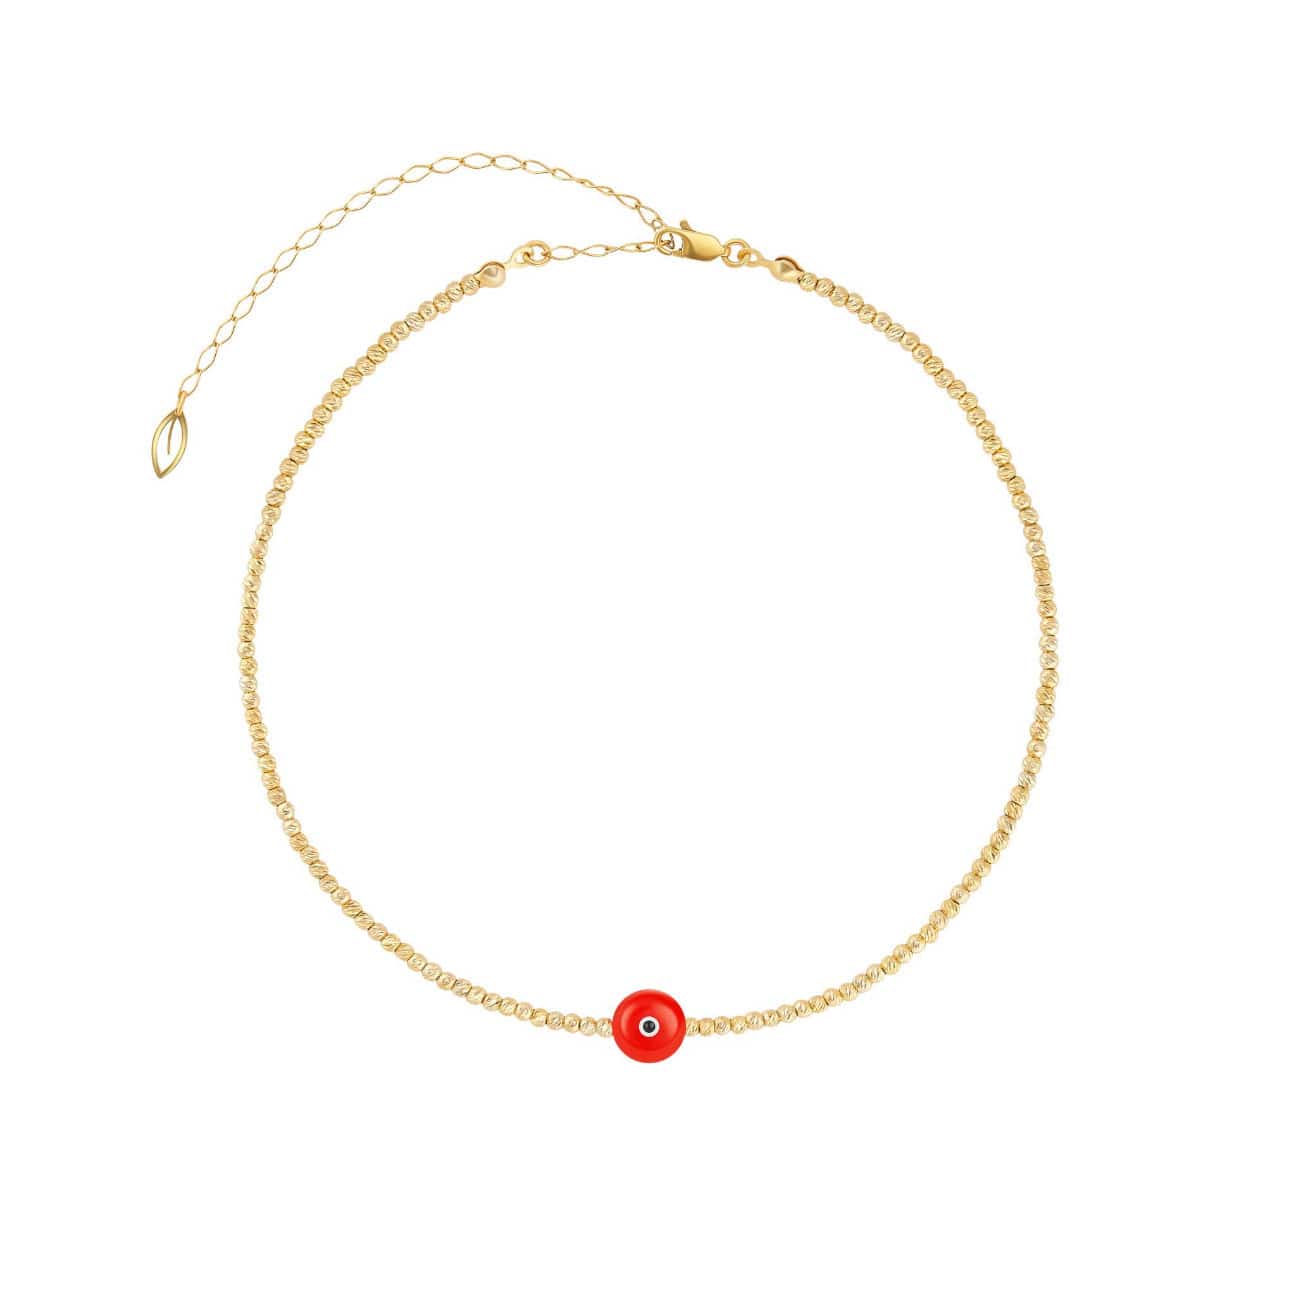 Majestic Evil Eye Bead Choker - Yellow Gold and Coral - Golden Tangerine